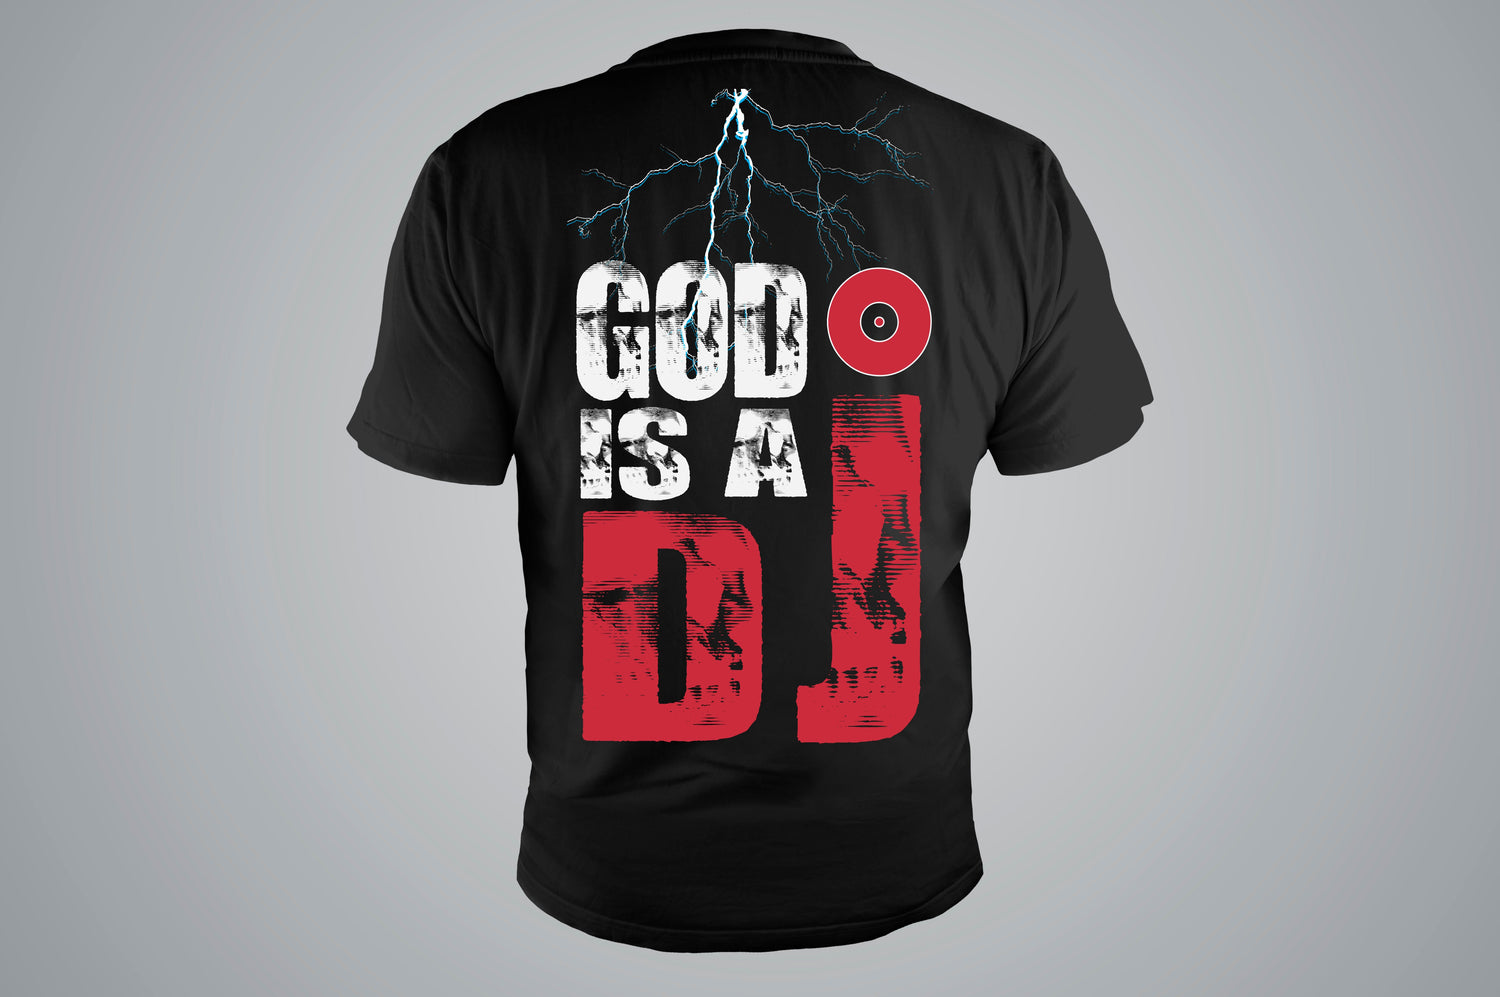 Fitted t-shirt honoring the DJ